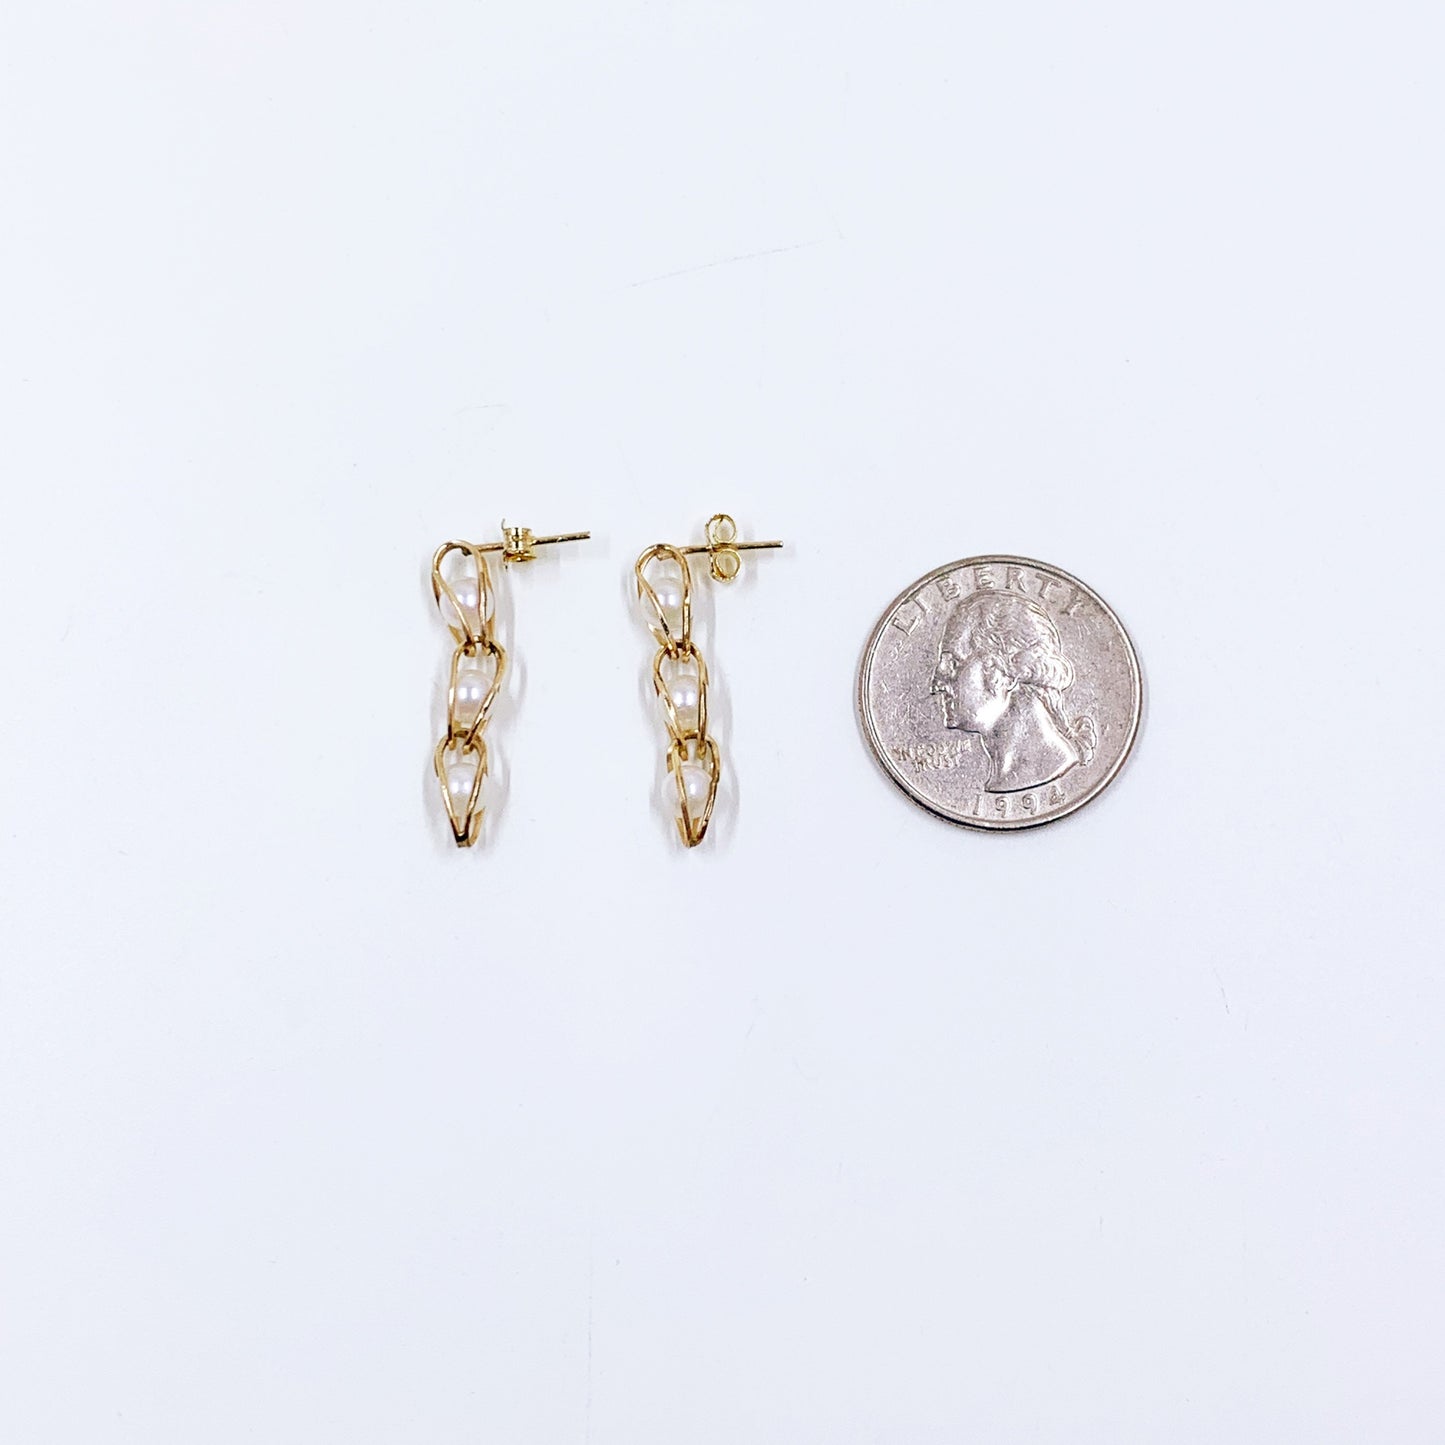 Vintage 14K Gold Caged Pearl Earrings | Classic Pearl Drop Earrings | 14K Pearl Dangle Earrings